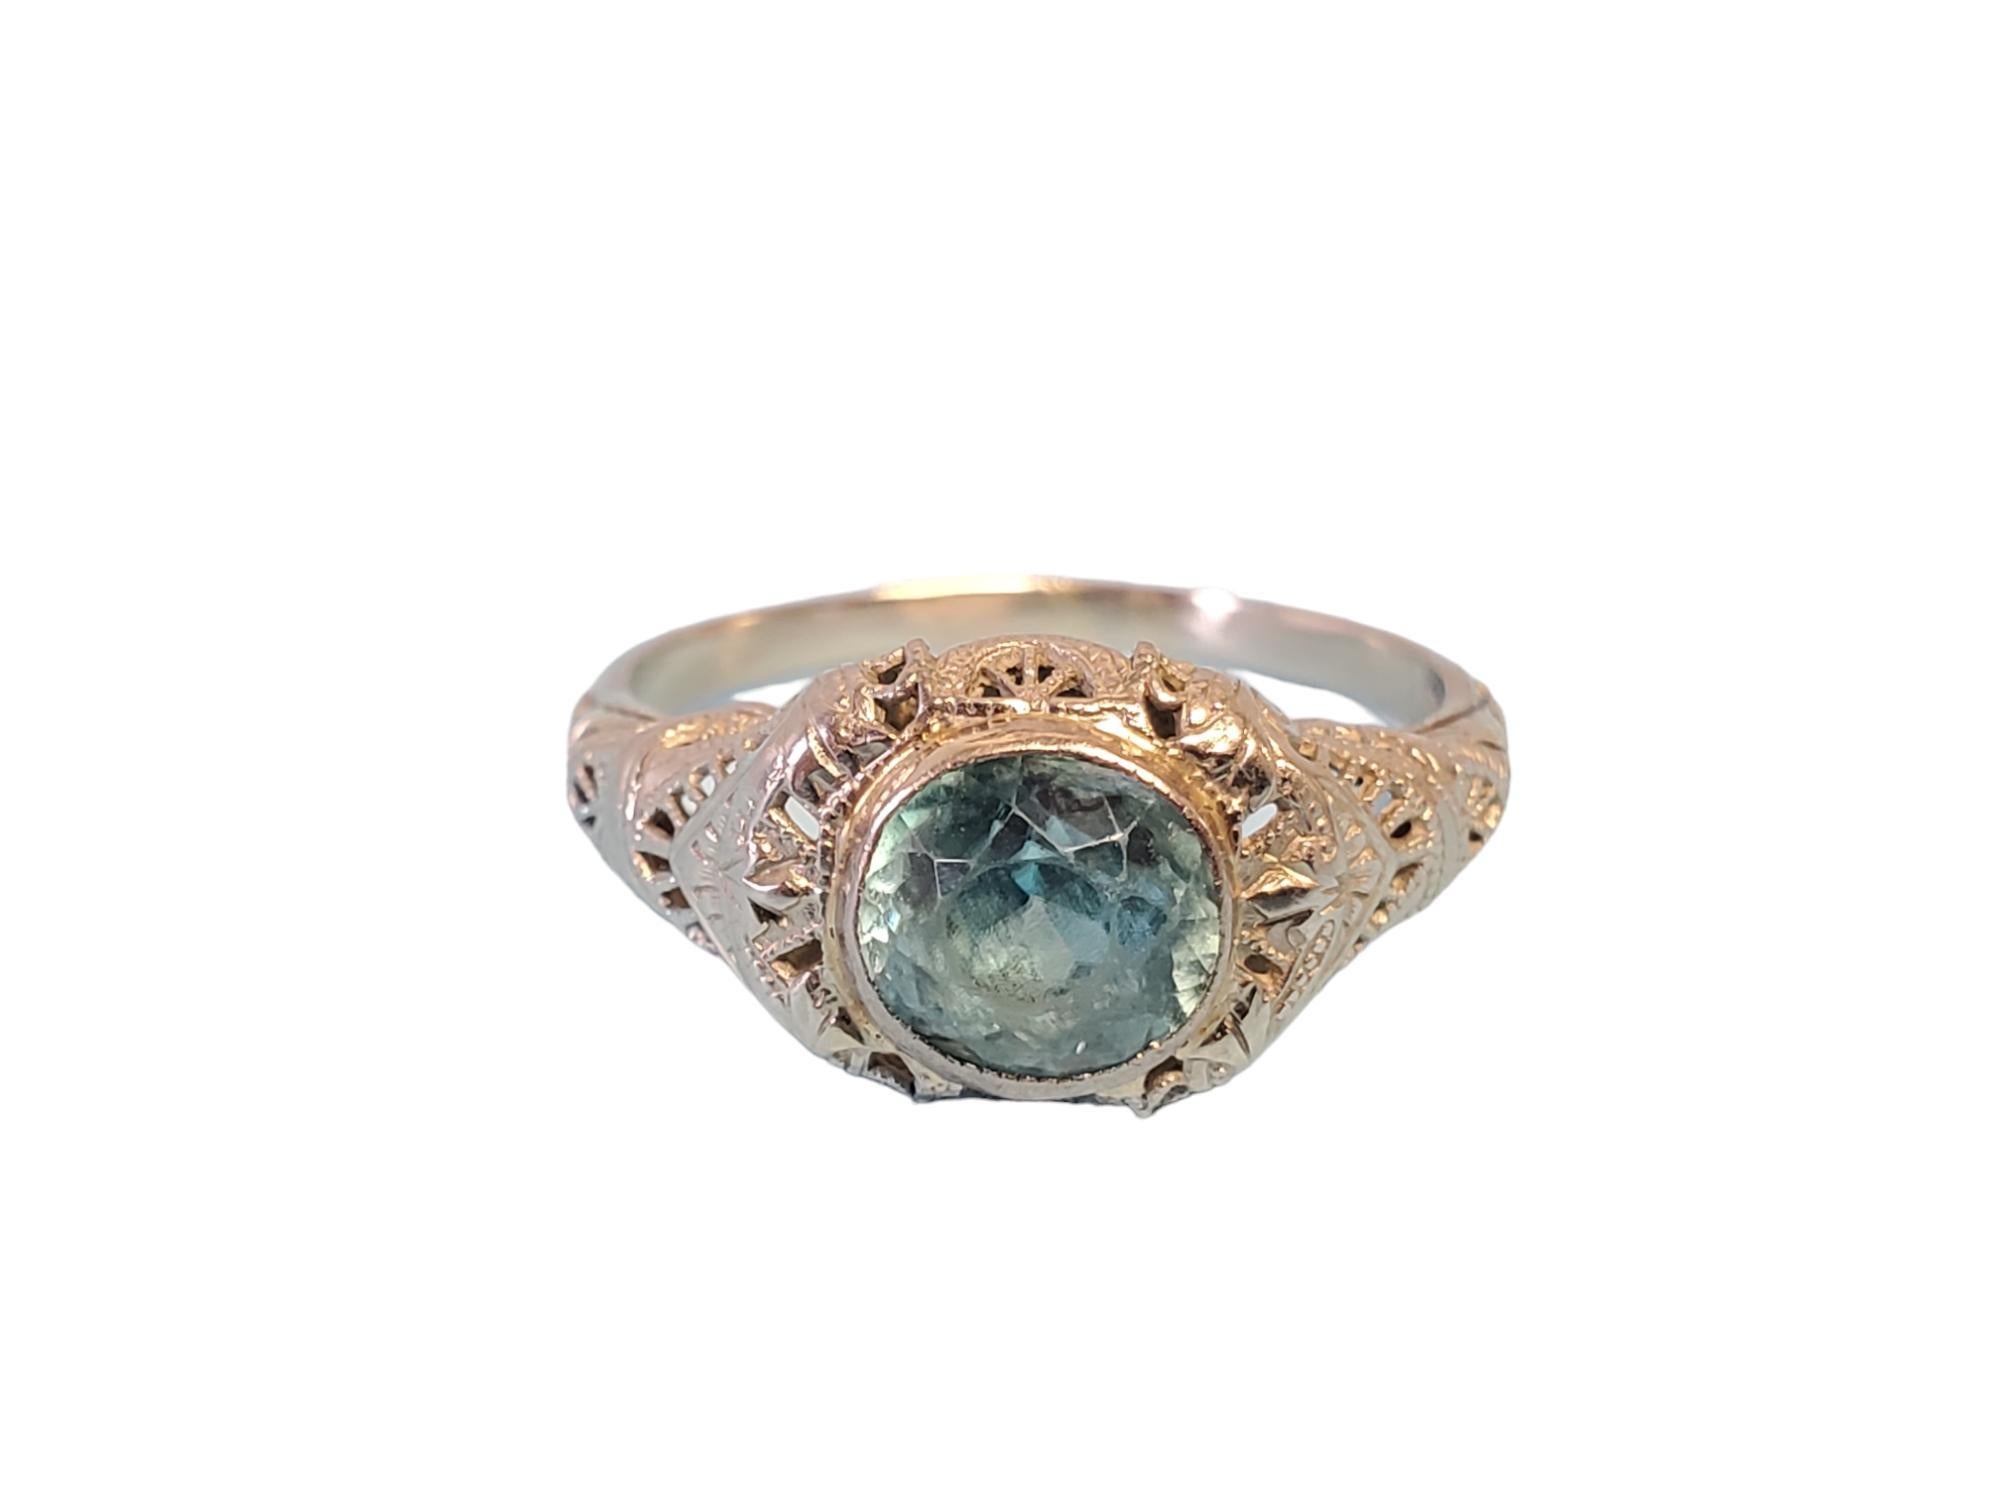 Listed is an antique Deco 18k white gold ring with a 7.5mm blue zircon center. The stone has some abrasions from age but I can't see it without magnification. The ring is in very good condition with no issues. Size 8